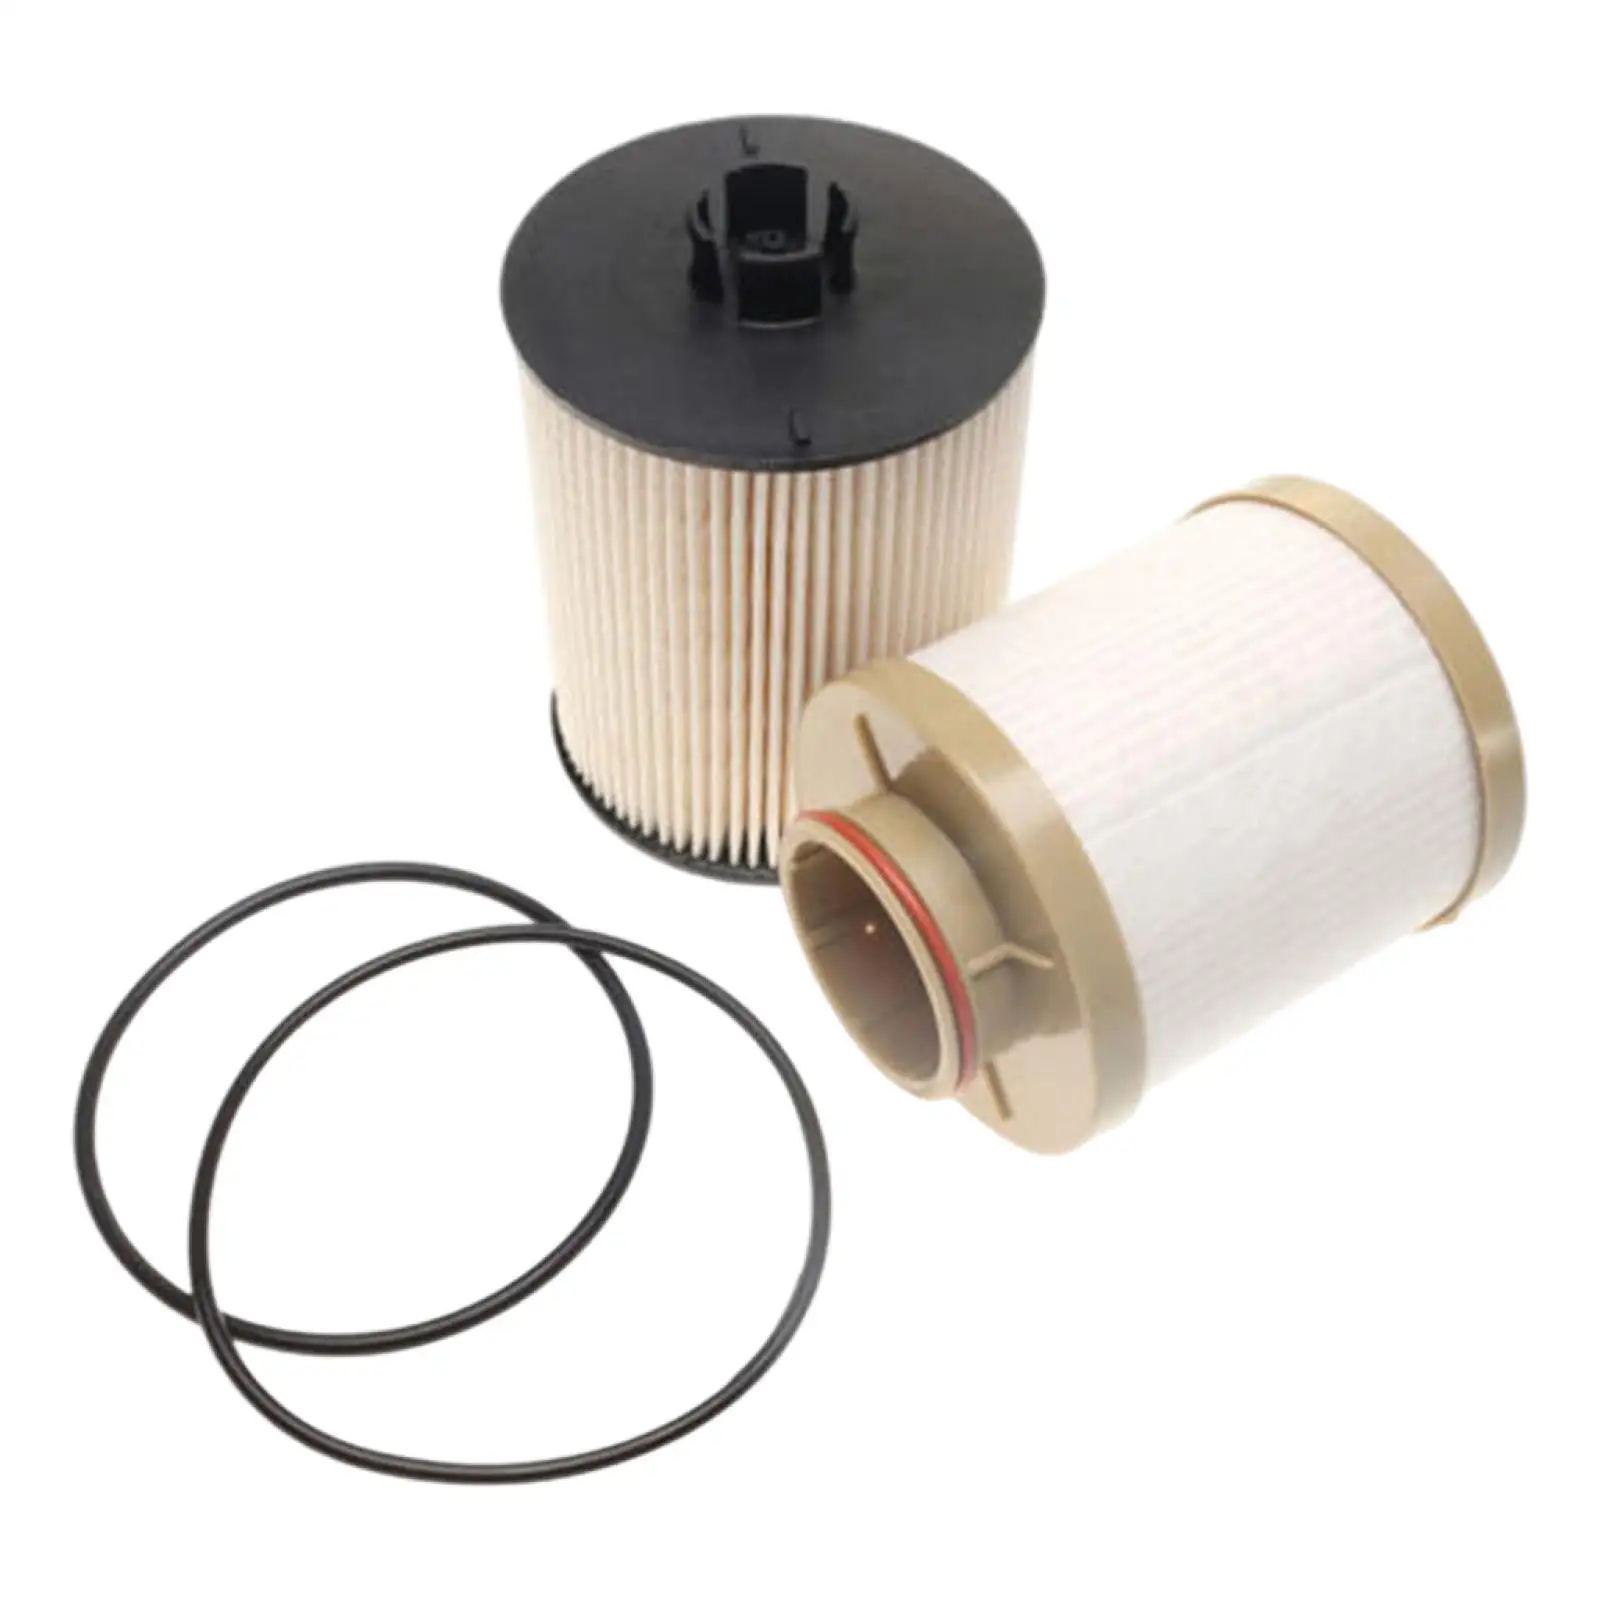 Fuel Filter for 6.4L V8 Powerstroke for Ford F550 08-10 8C3Z9N184C Parts ACC Replacement